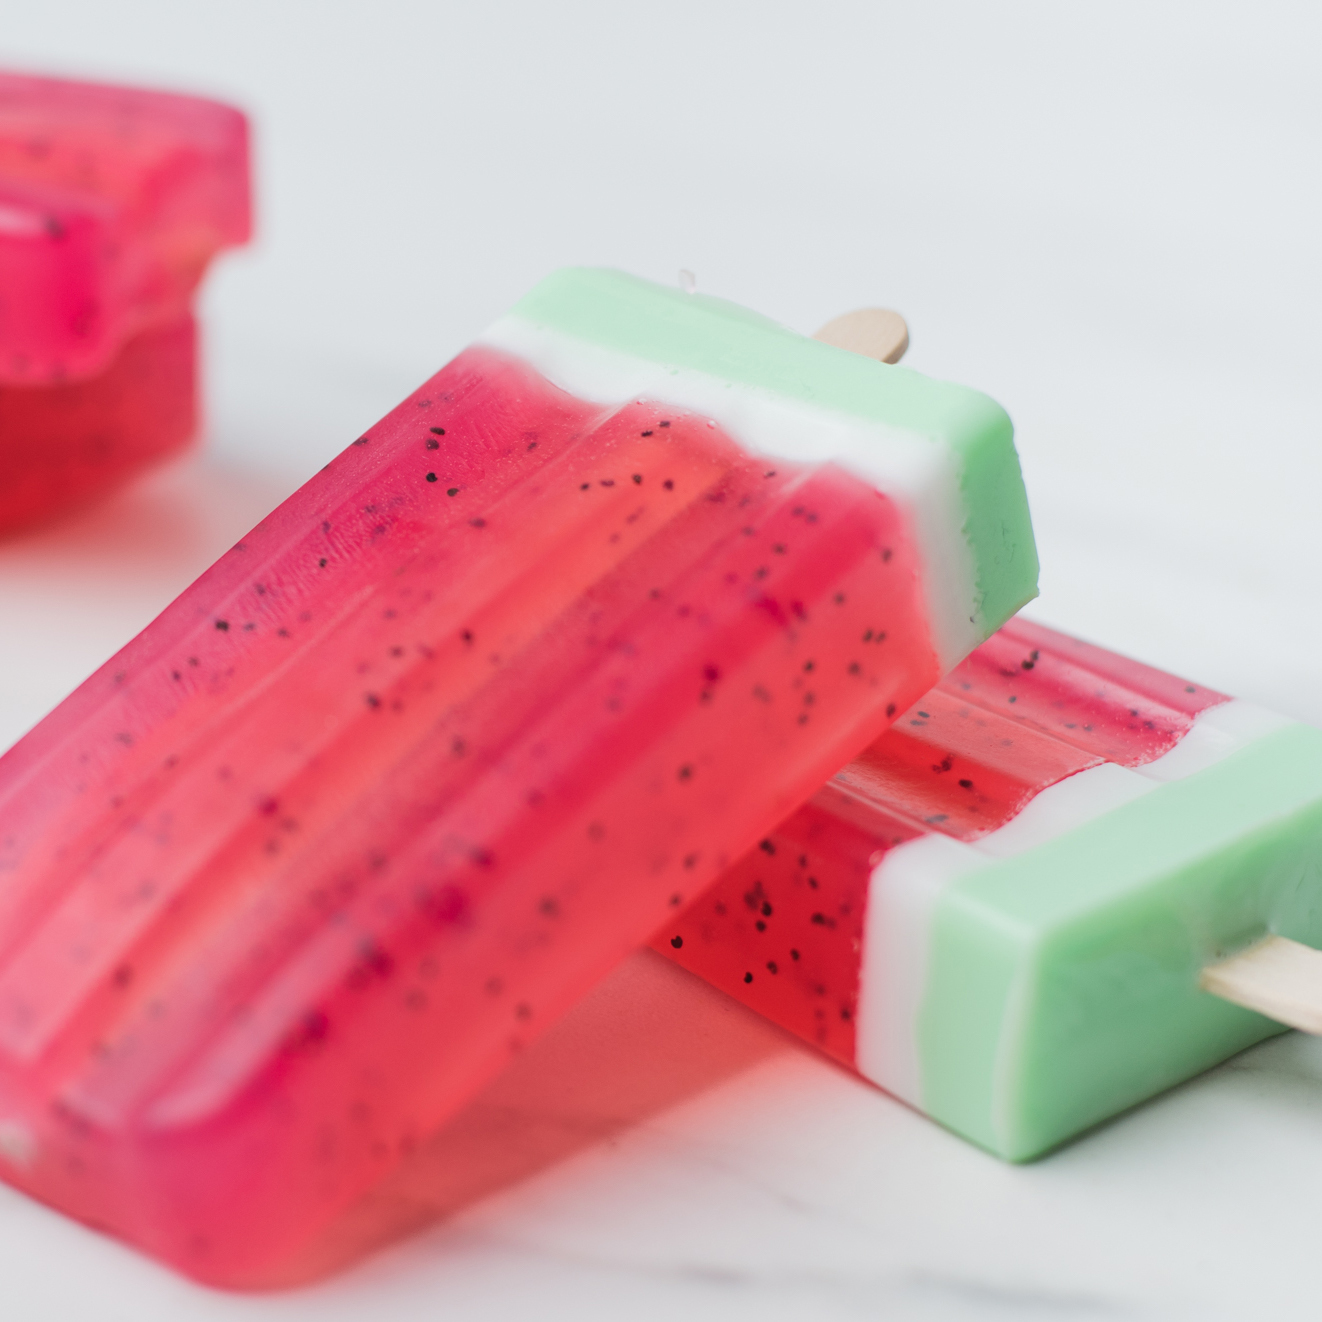 How to make watermelon popsicle soaps